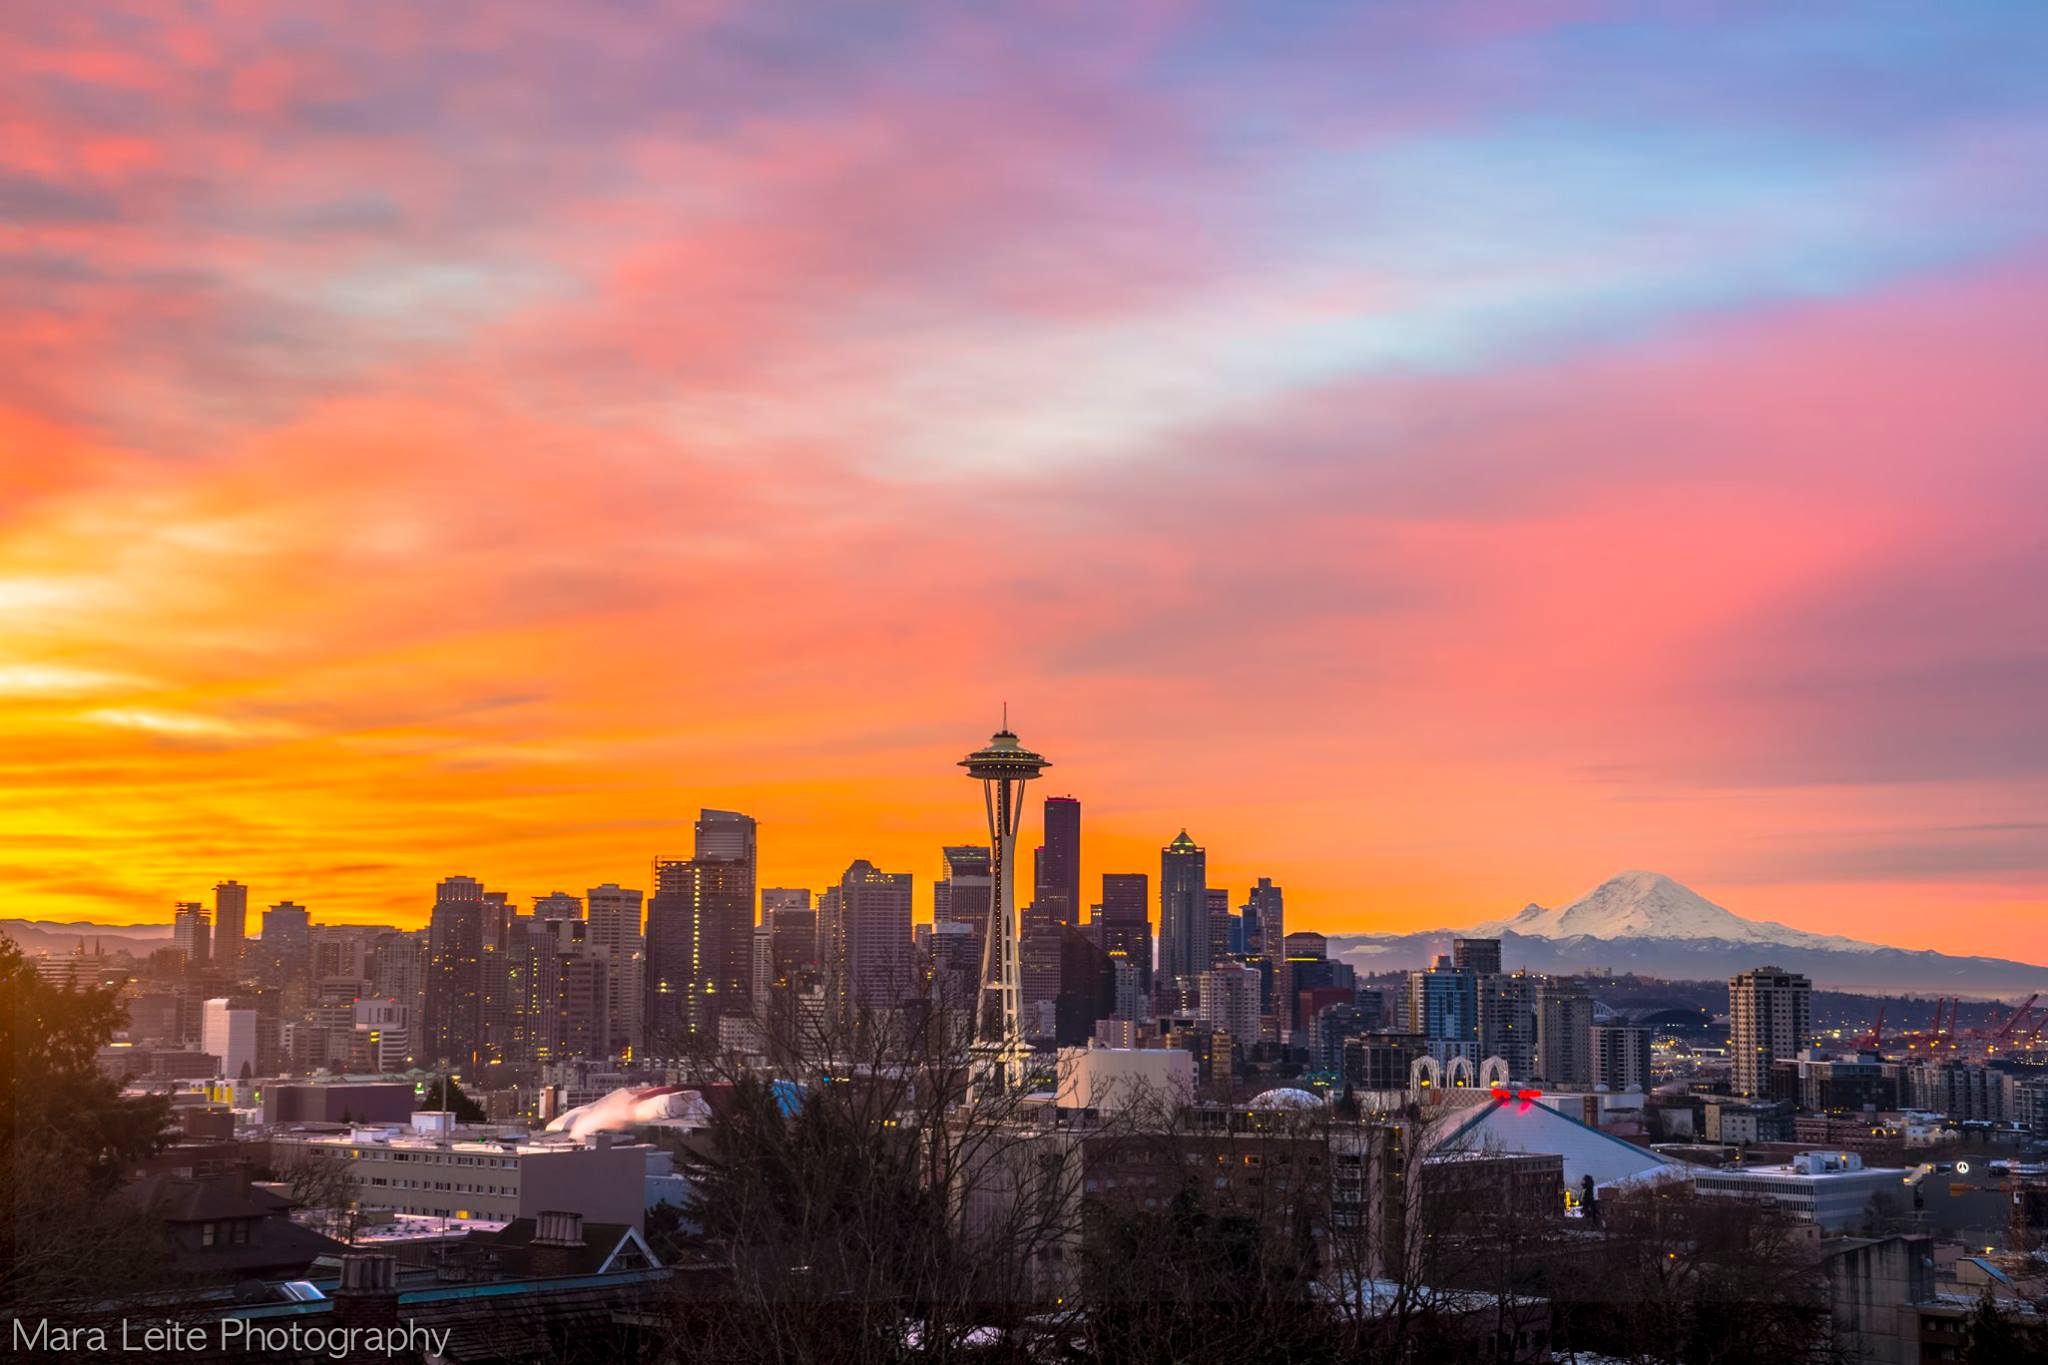 Seattle on top 10 best places to live in US | king5.com